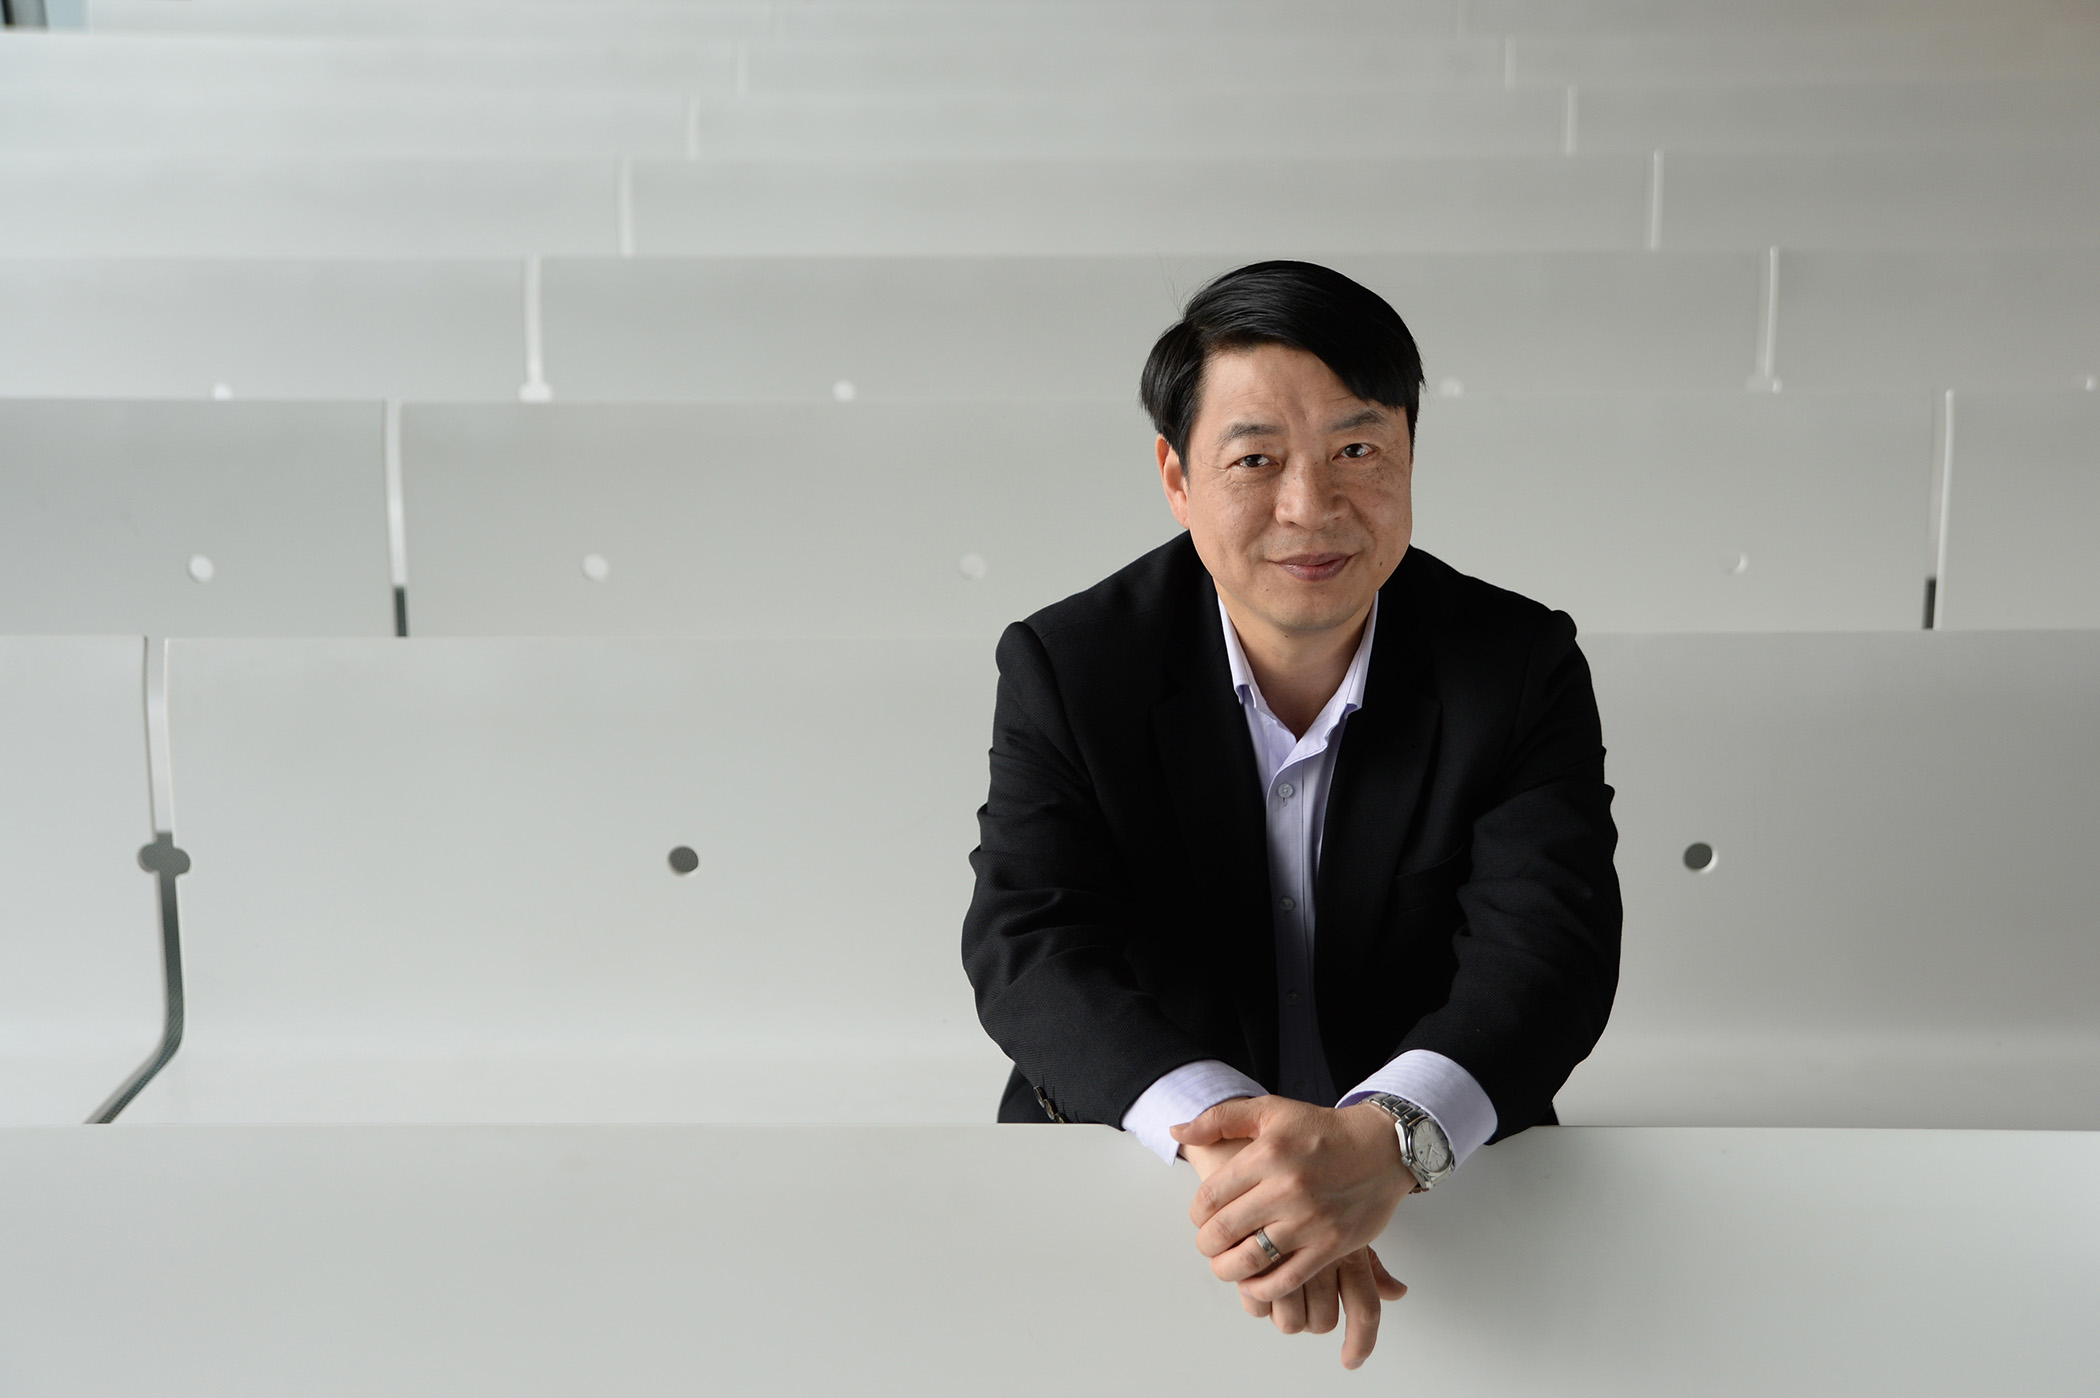 Mike Xie's success has come through bringing architects and engineers together, and learning from both.